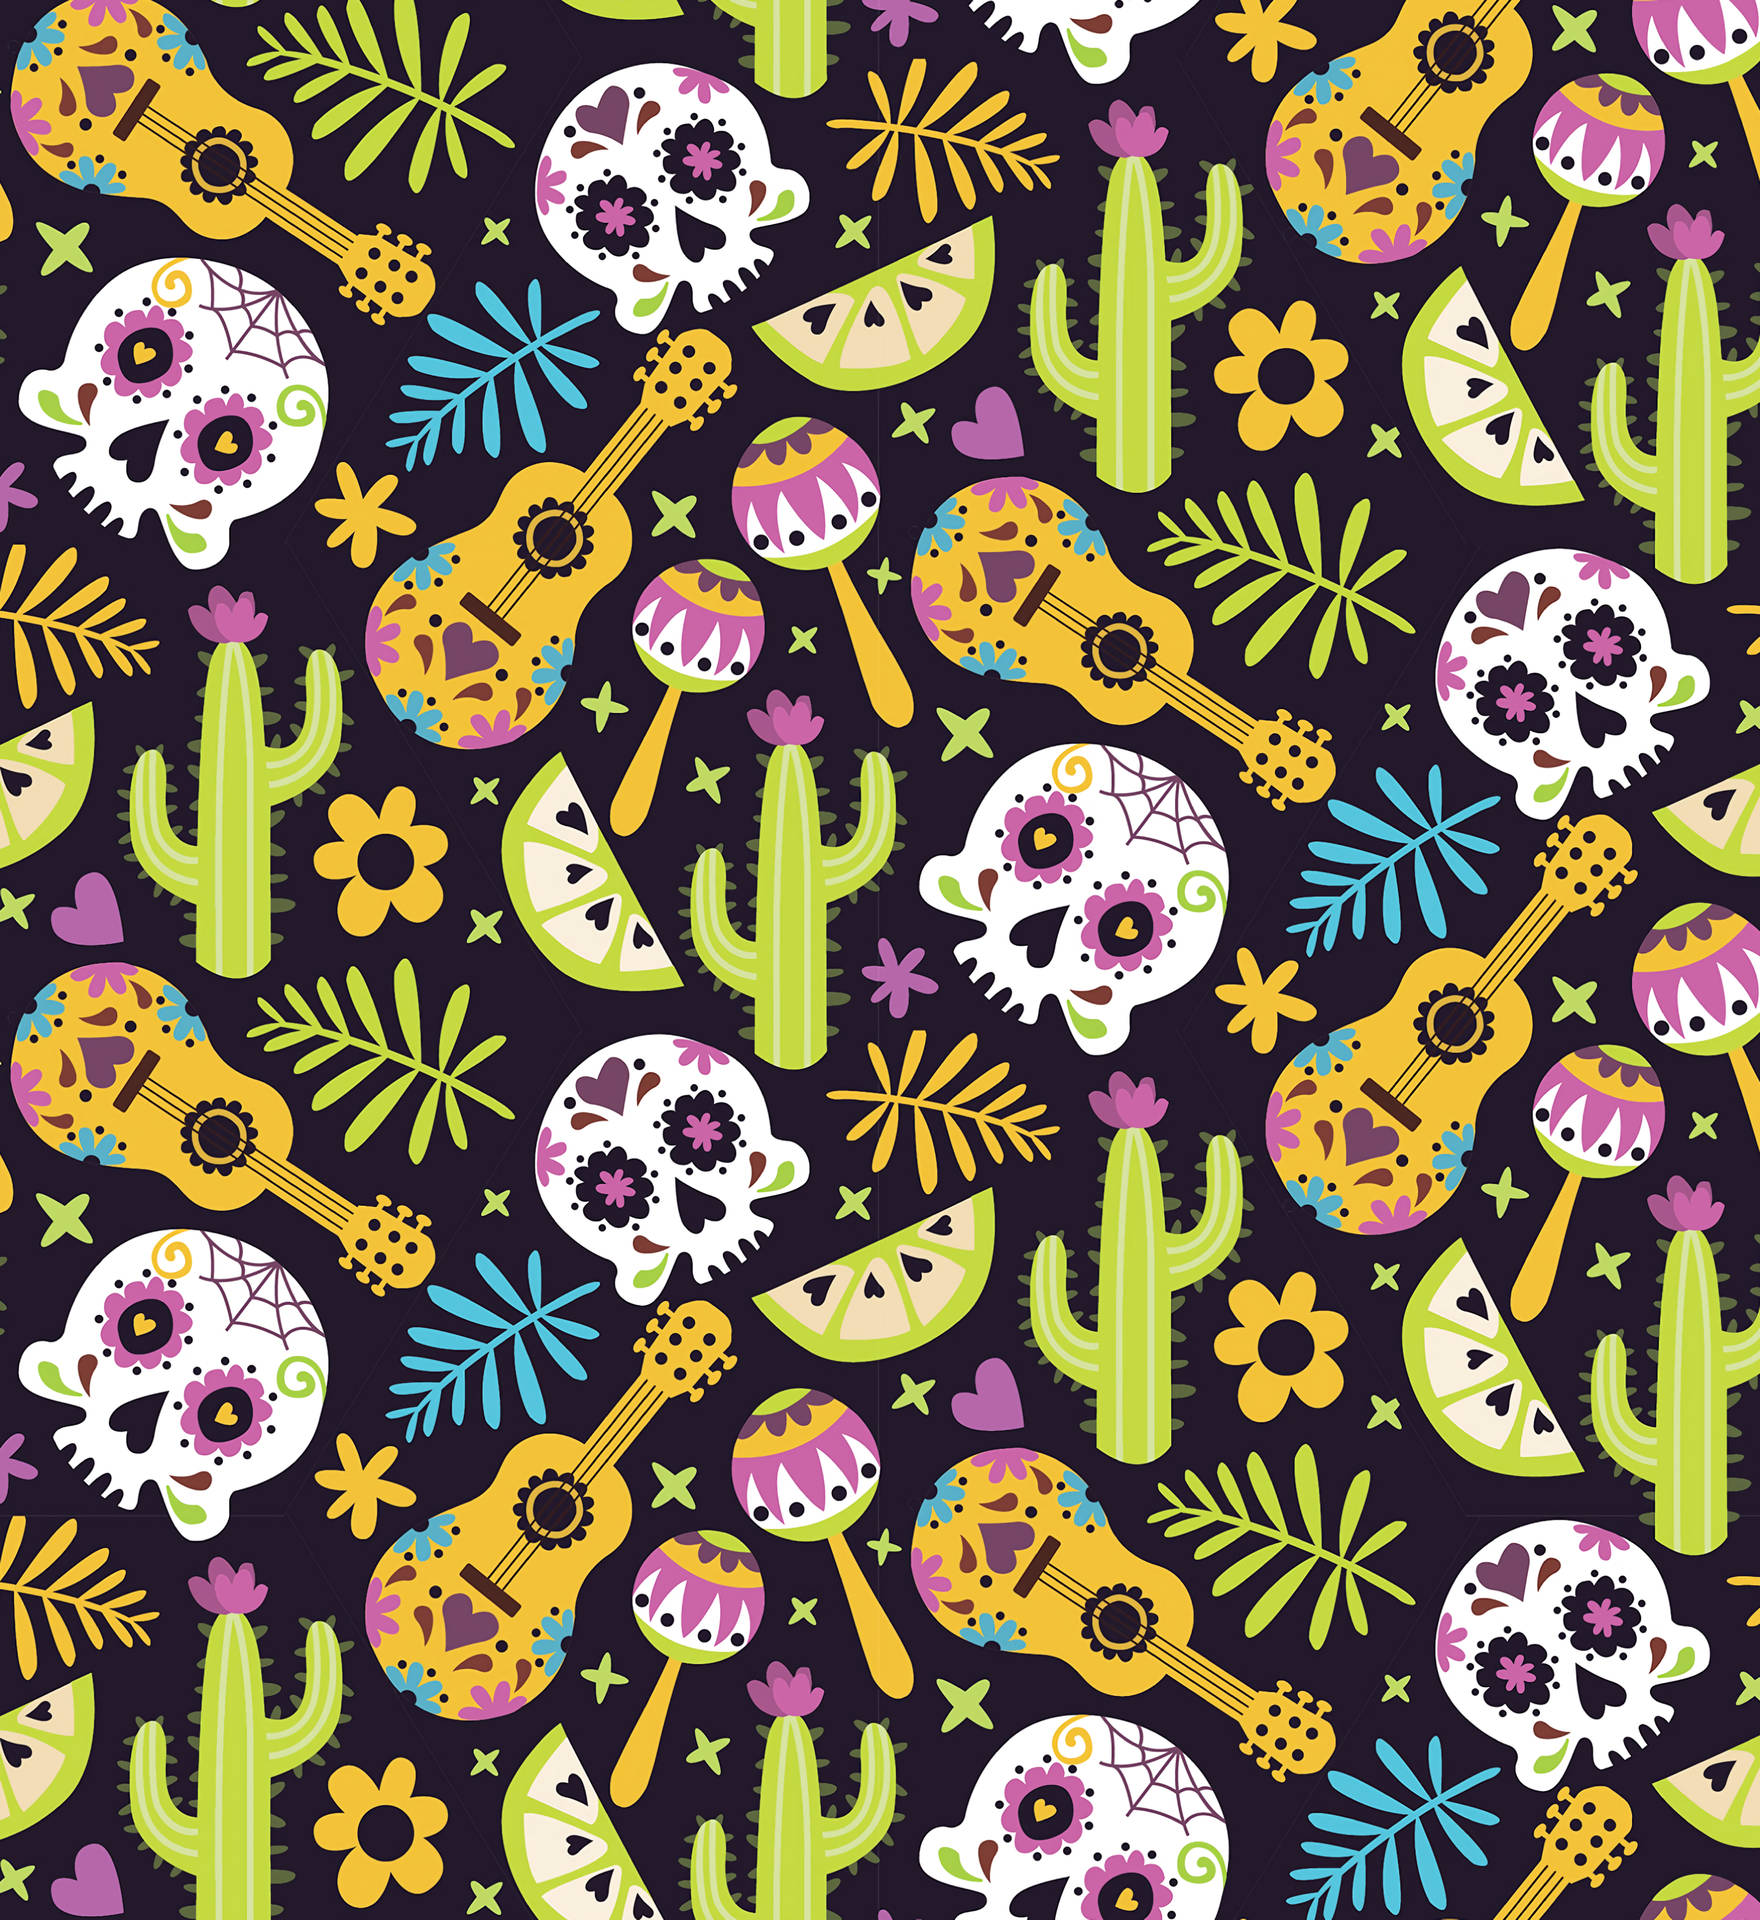 Mexico Skull-cacti-guitar Patterns Picture